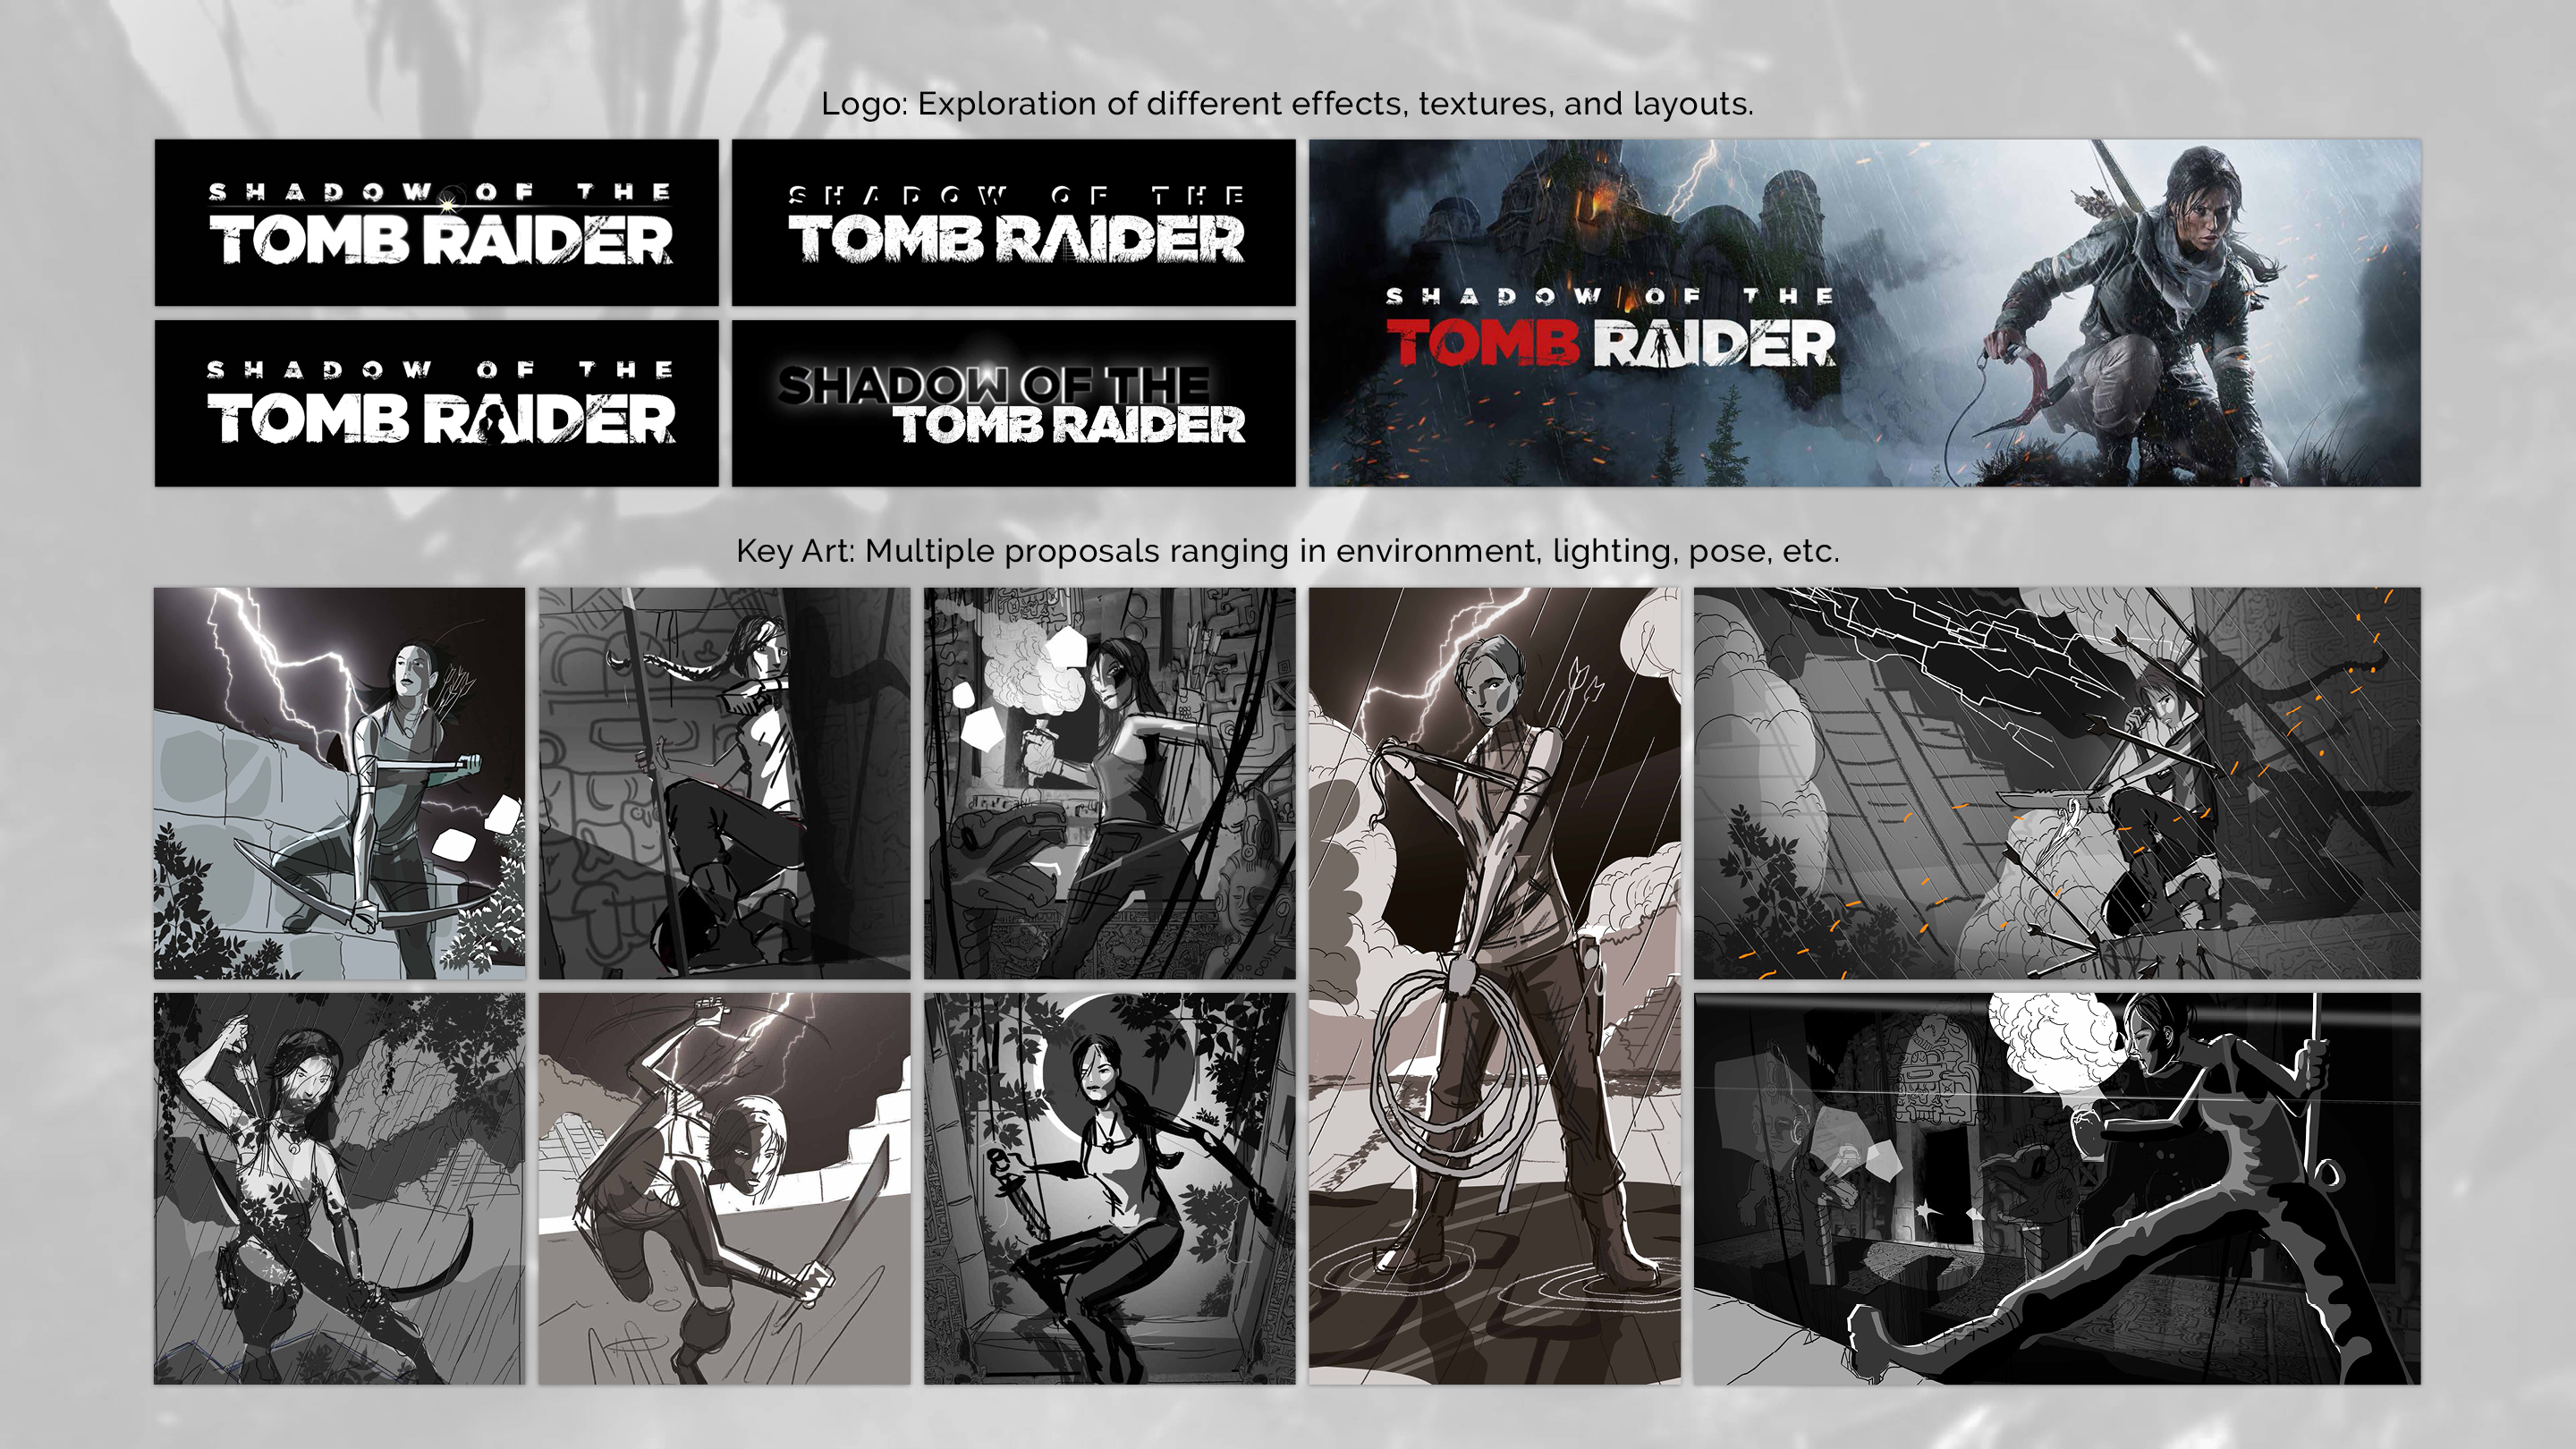 [Rumor] Shadow of the Tomb Raider logos and artwork leaked